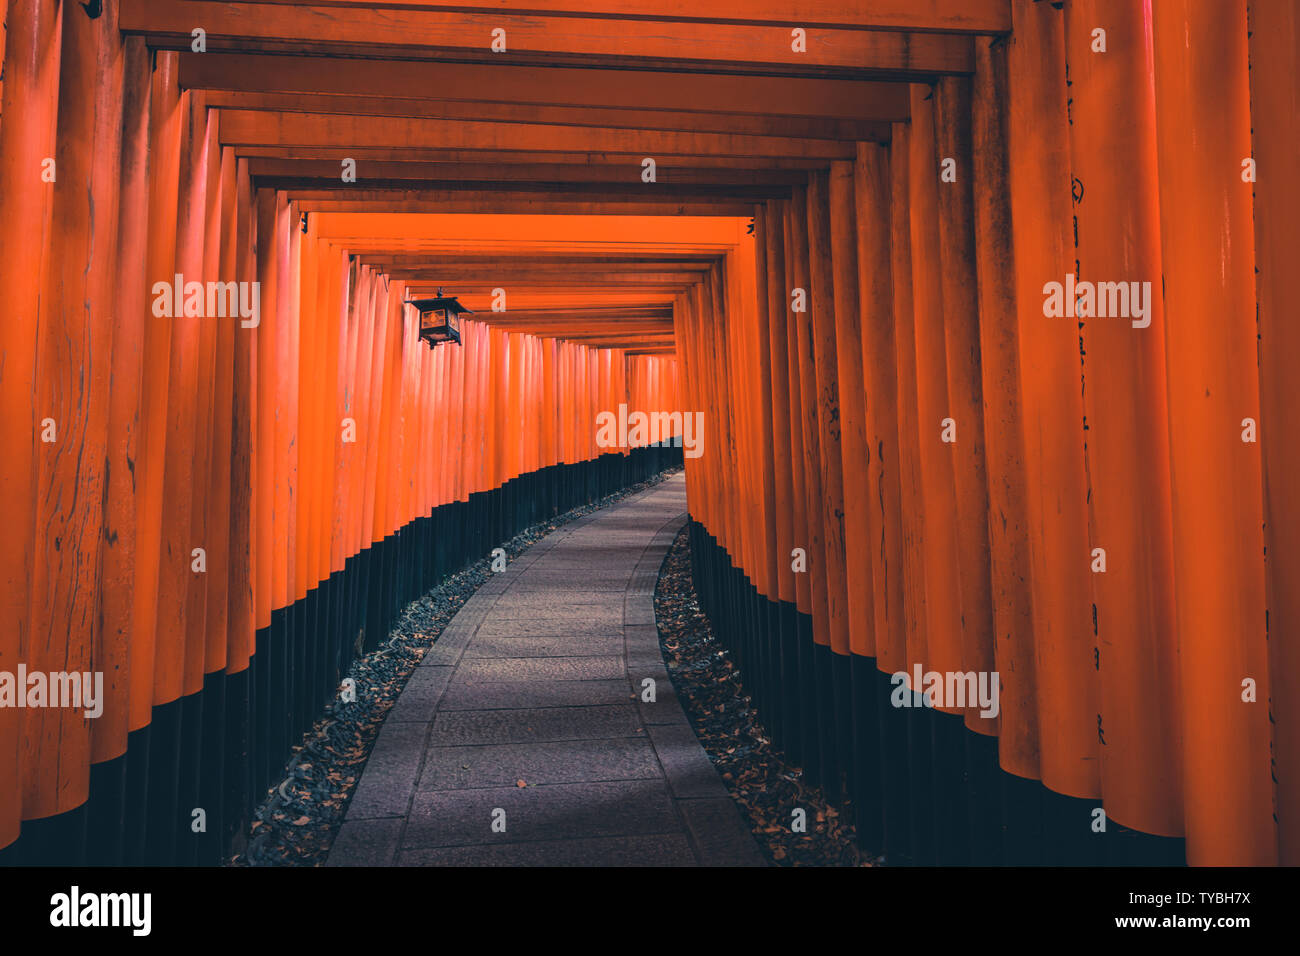 Fushimi Inari Shrine is an important Shinto shrine in southern Kyoto, Japan. It is famous for its thousands of vermilion torii gates, which straddle a Stock Photo